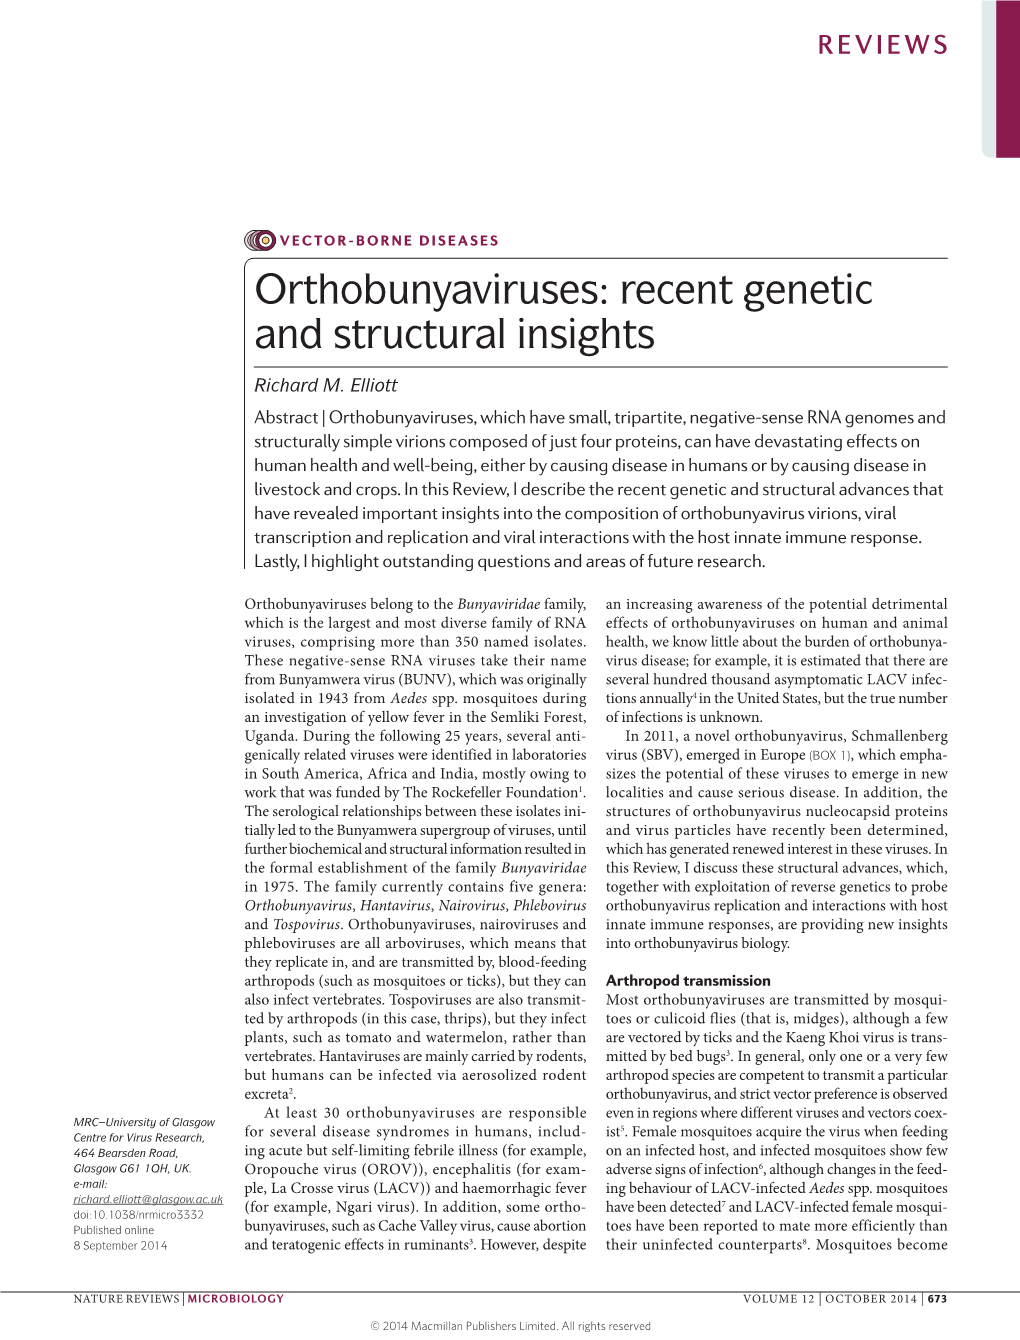 Orthobunyaviruses: Recent Genetic and Structural Insights